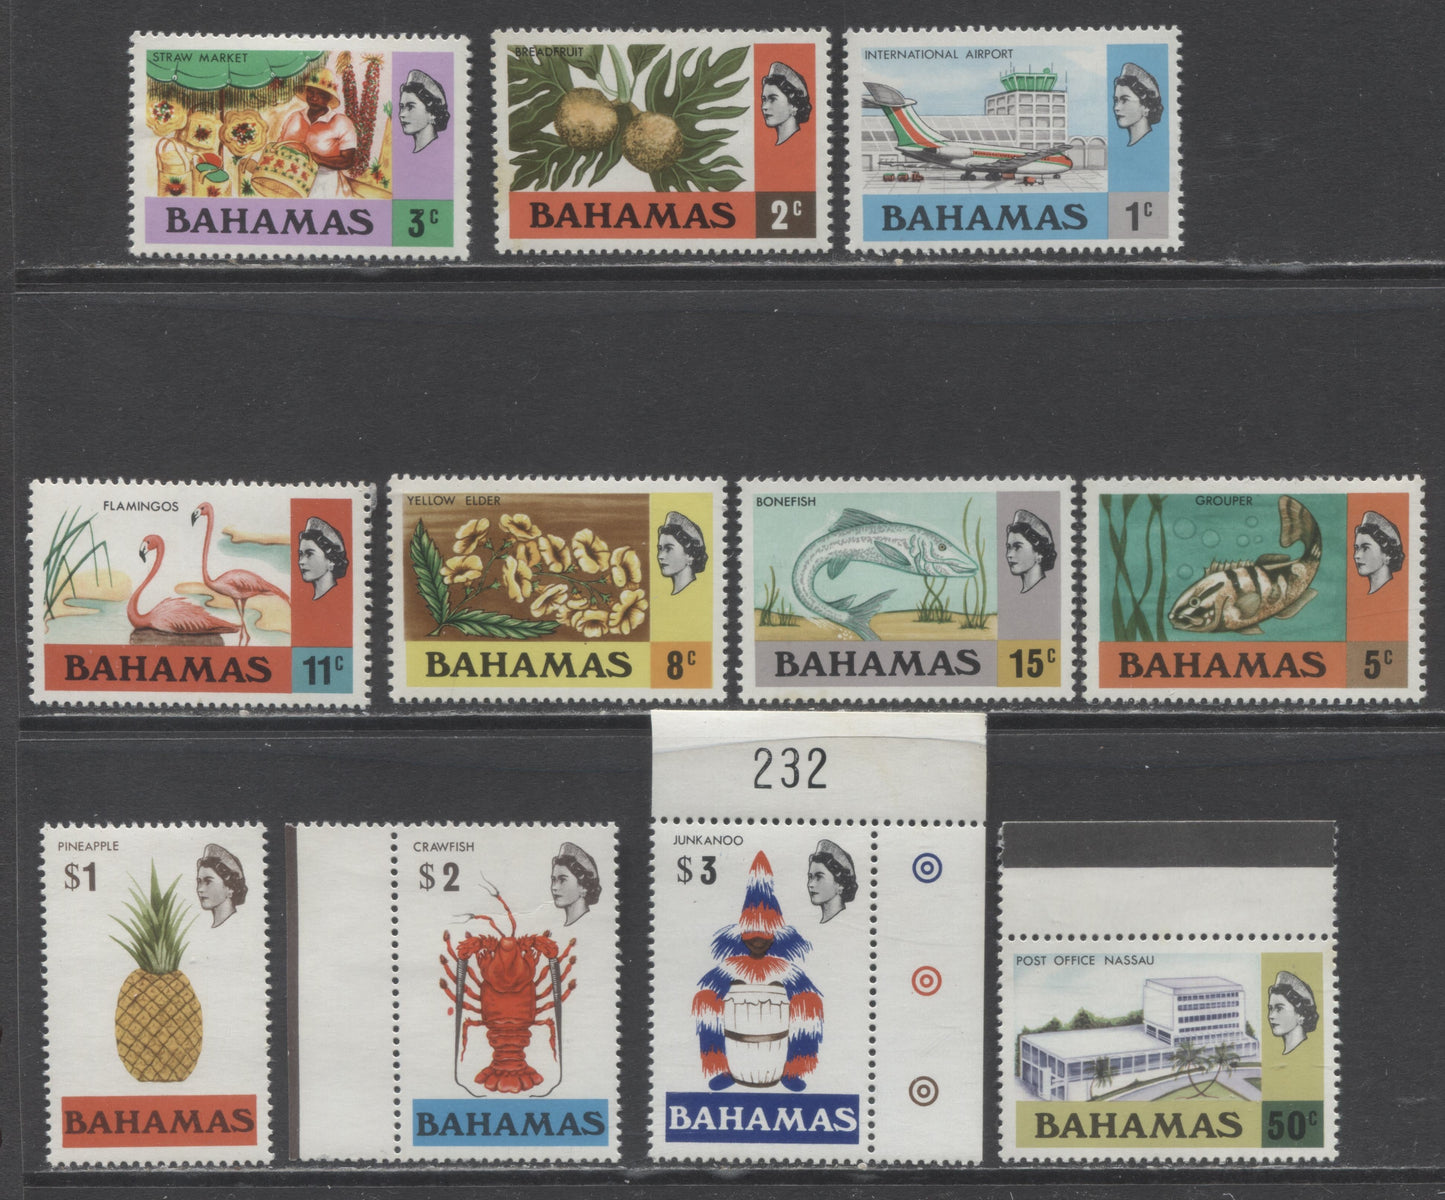 Lot 420 Bahamas SC#313/330 1971 Definitives, Upright & Sideways Wmks, 11 VFNH Singles, Click on Listing to See ALL Pictures, 2017 Scott Cat. $10.9 USD